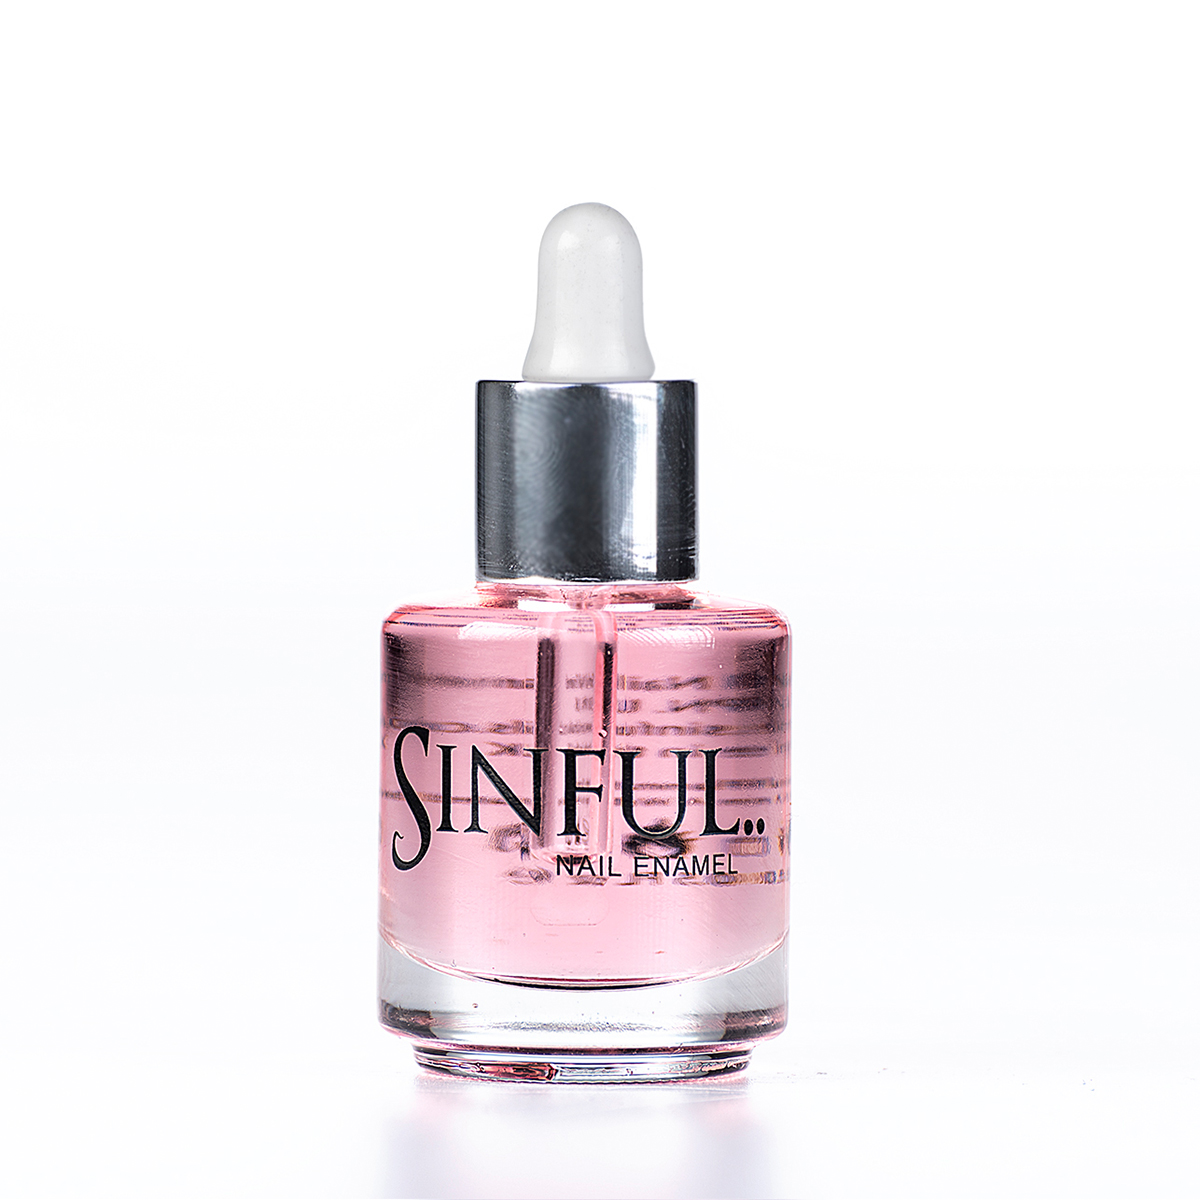 Sinful Cuticle Oil NEW cuticle oil enriched with Vitamin E to help keep cuticles supple and healthy. 15ml